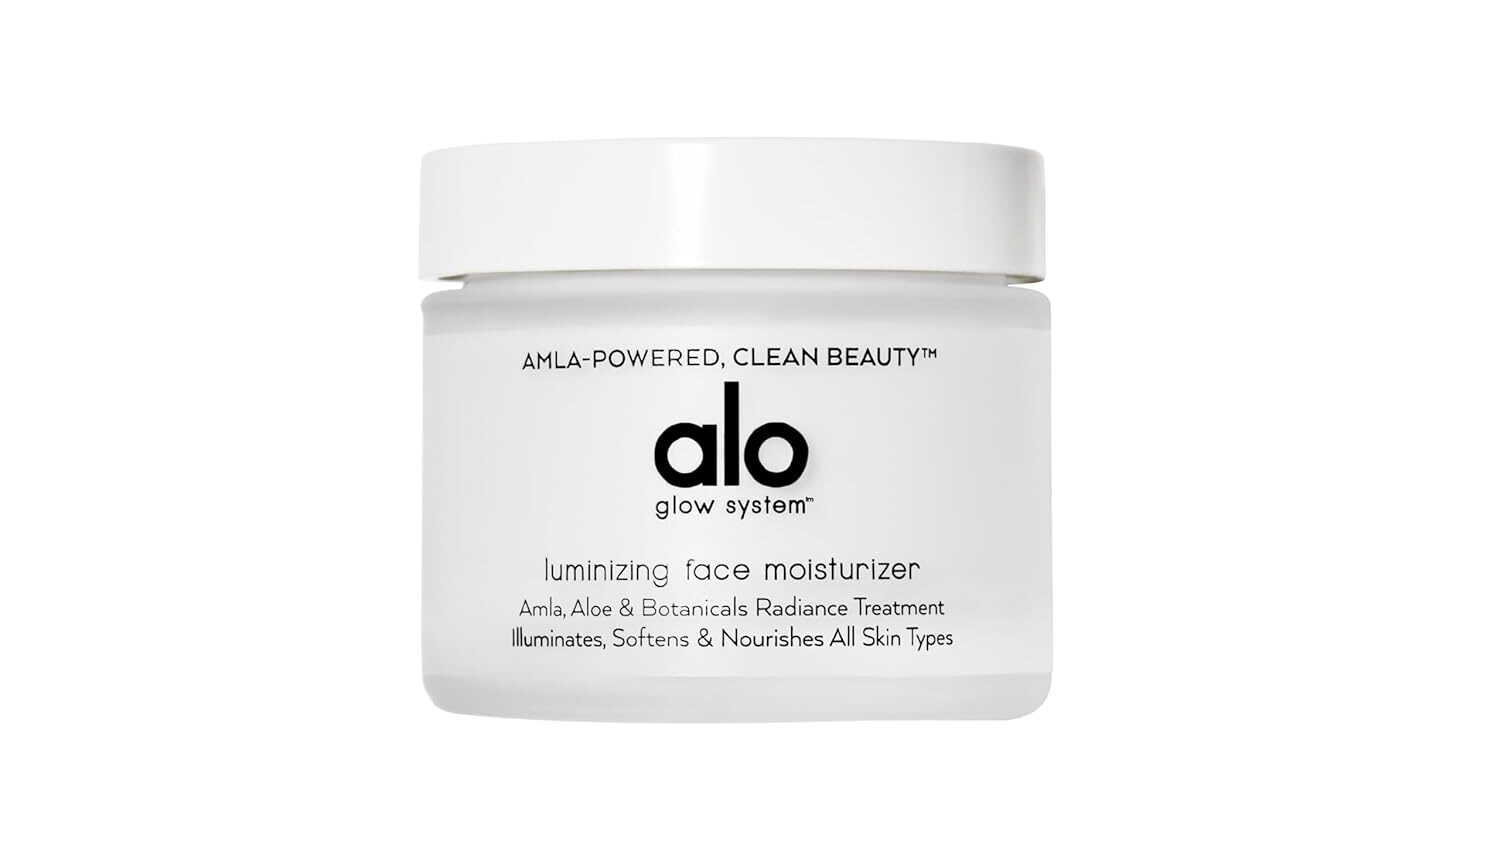 Find the Alo Luminizing Face Moisturizer Review